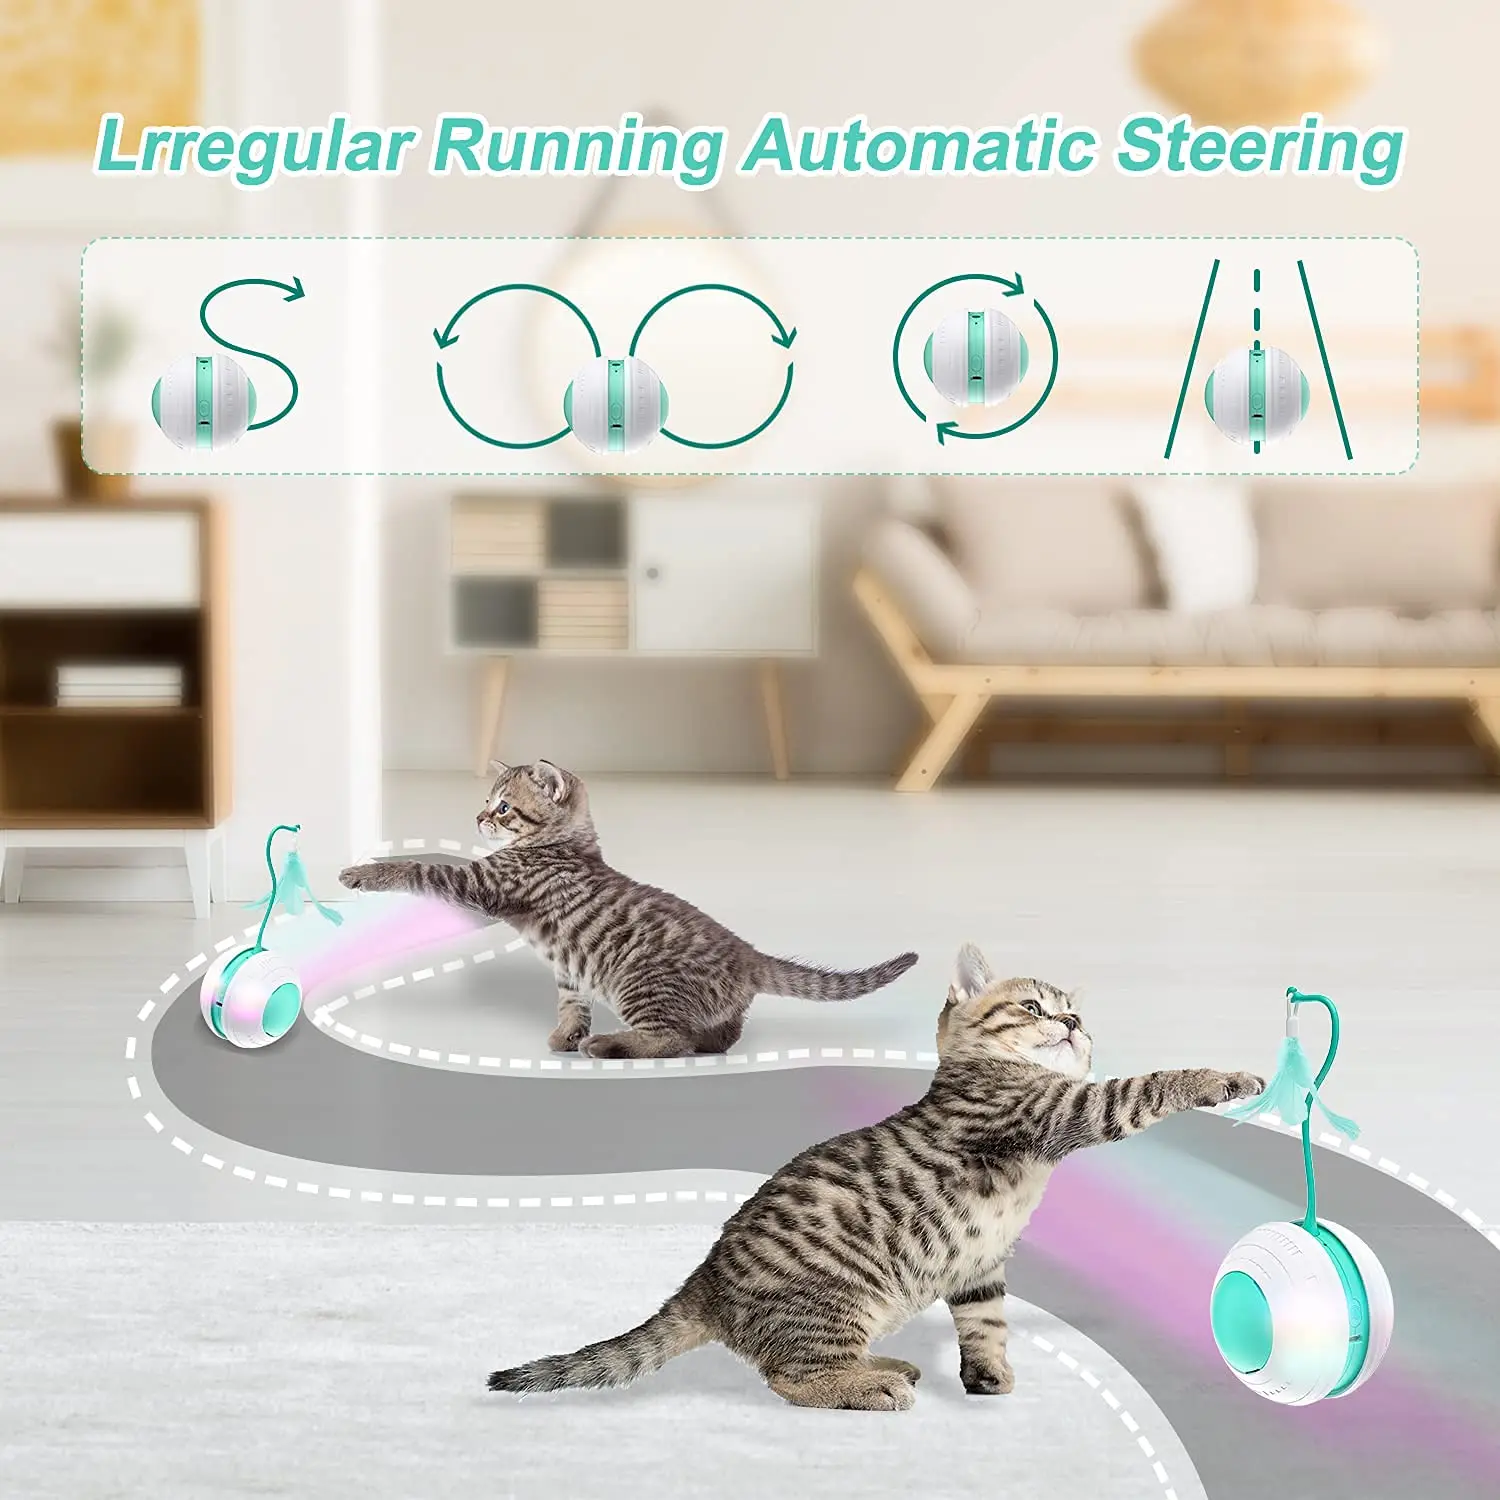 Smart Cat Ball Toys Bird Sound Interactive Cat Toys Automatic USB Charging 360 Degree Electric Cat Feather Funny Kitten Toys